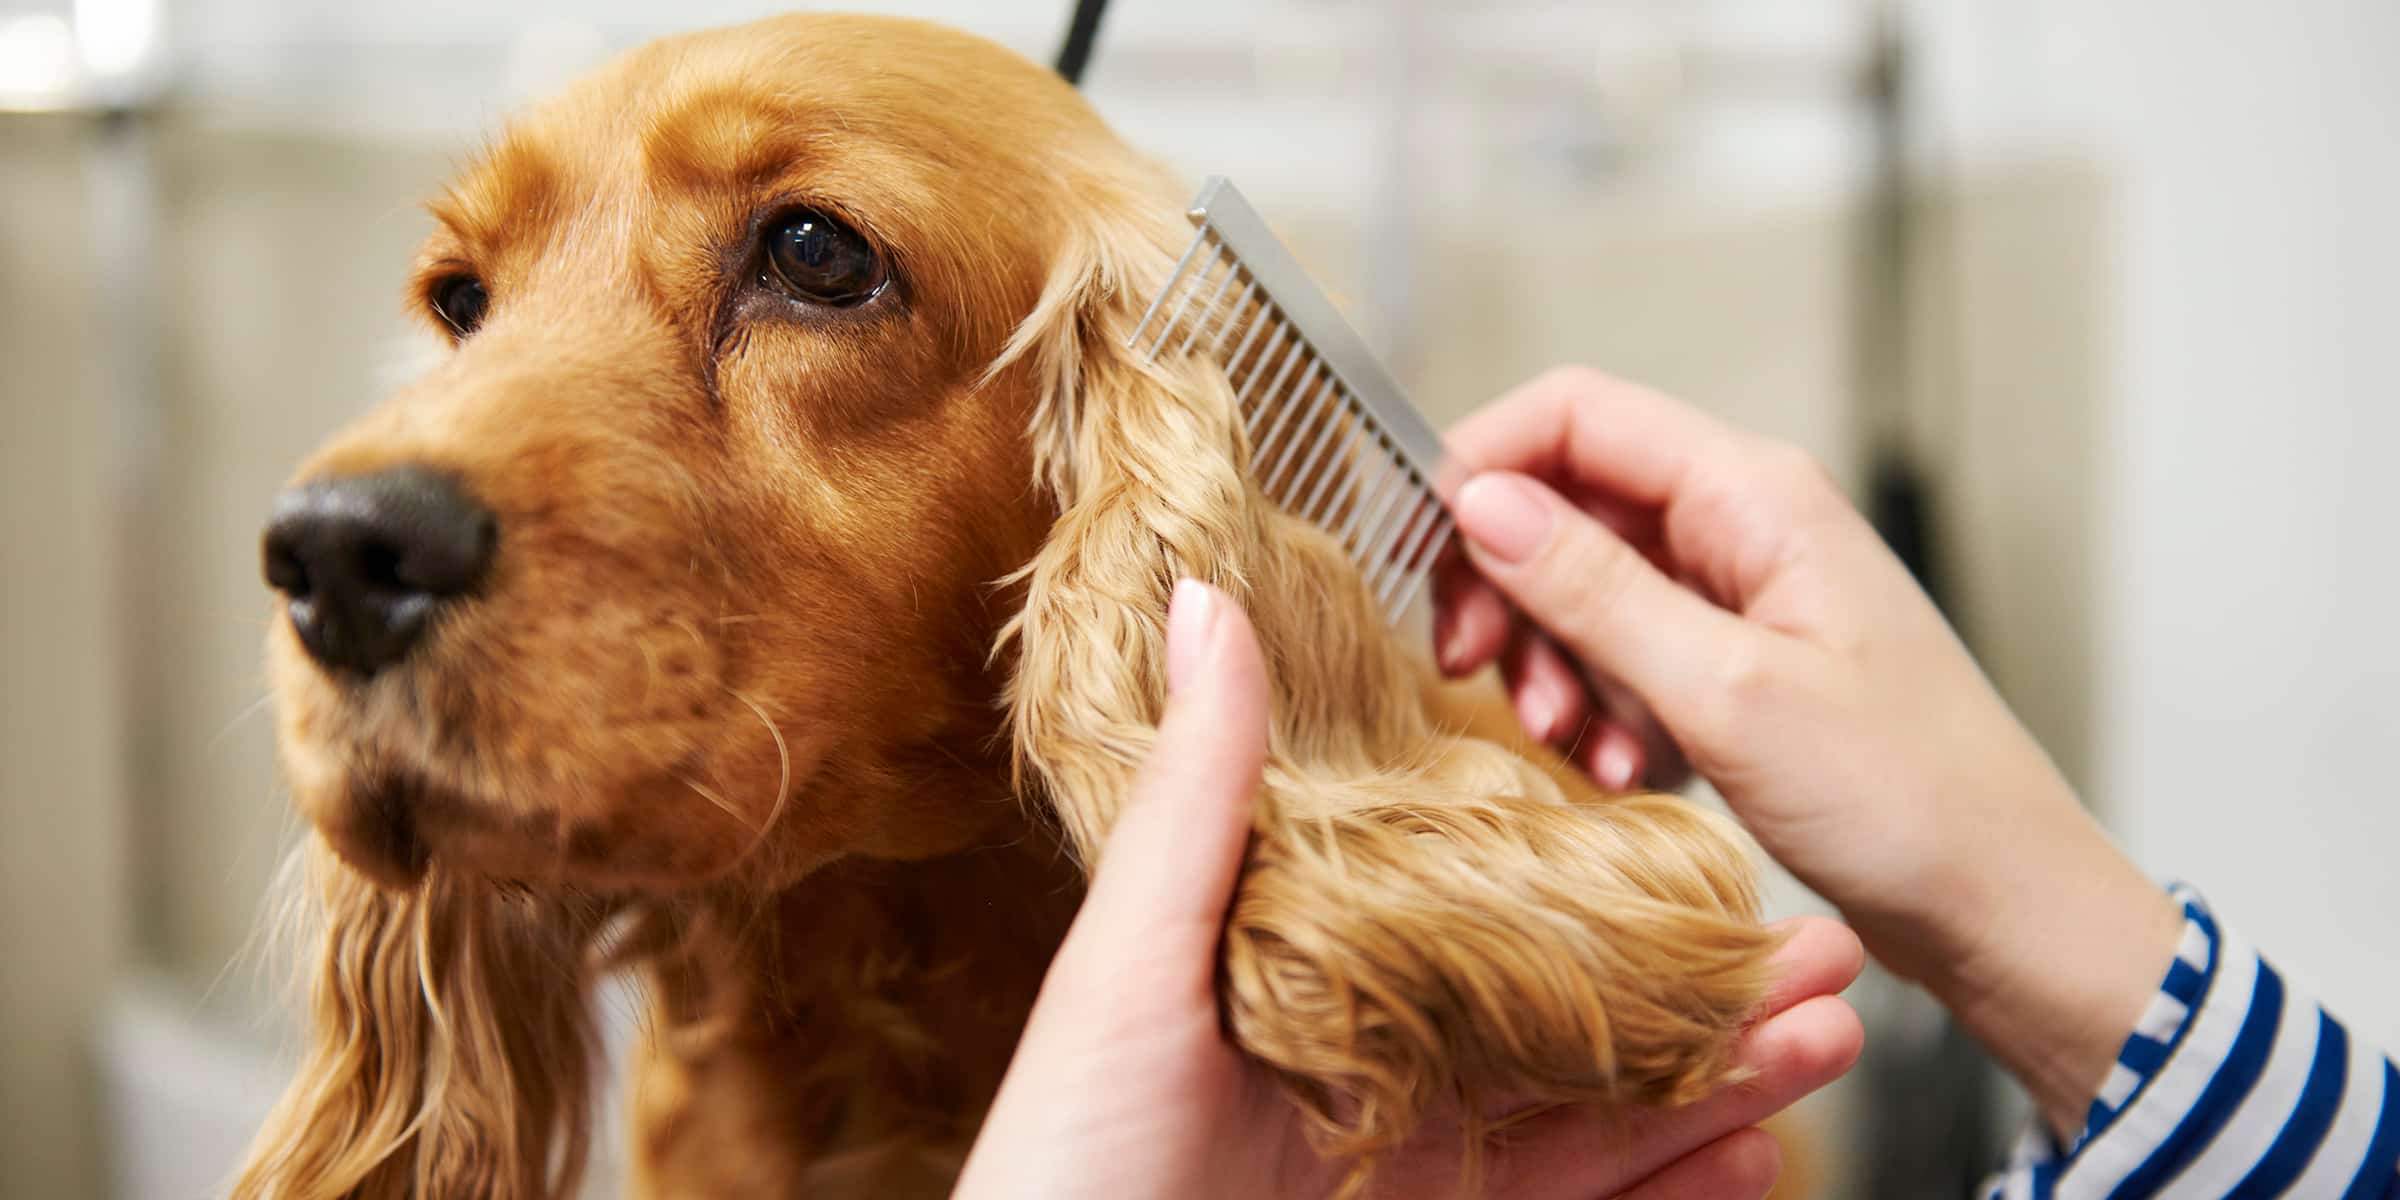 Petco printable grooming coupon - Trimming for a dog